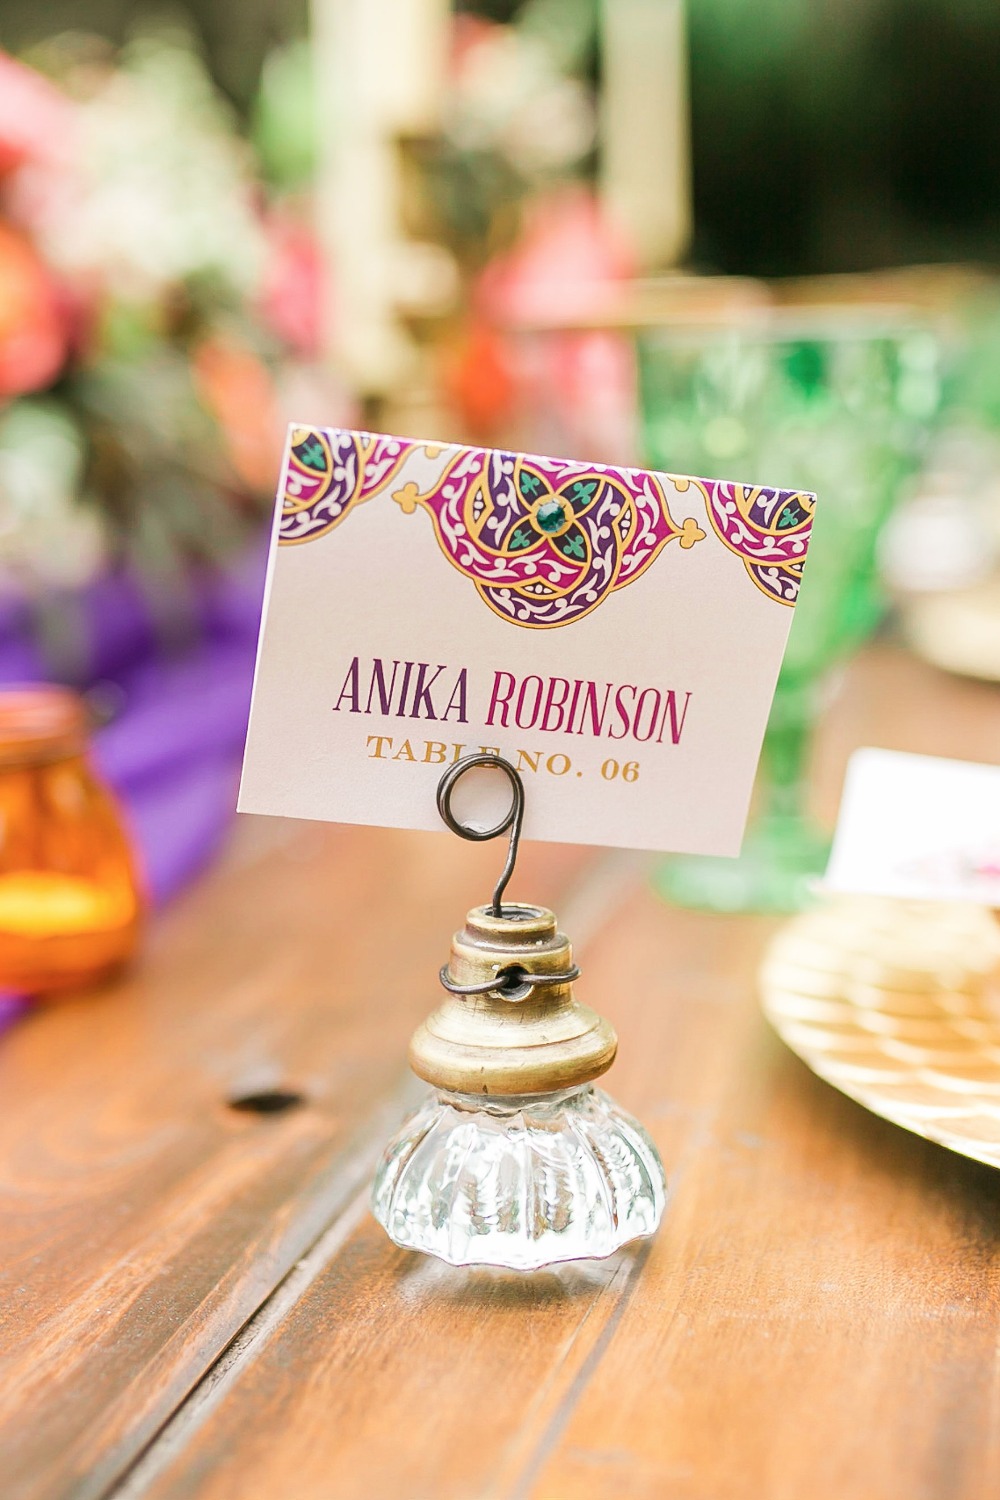 Cute place card and door knob holder